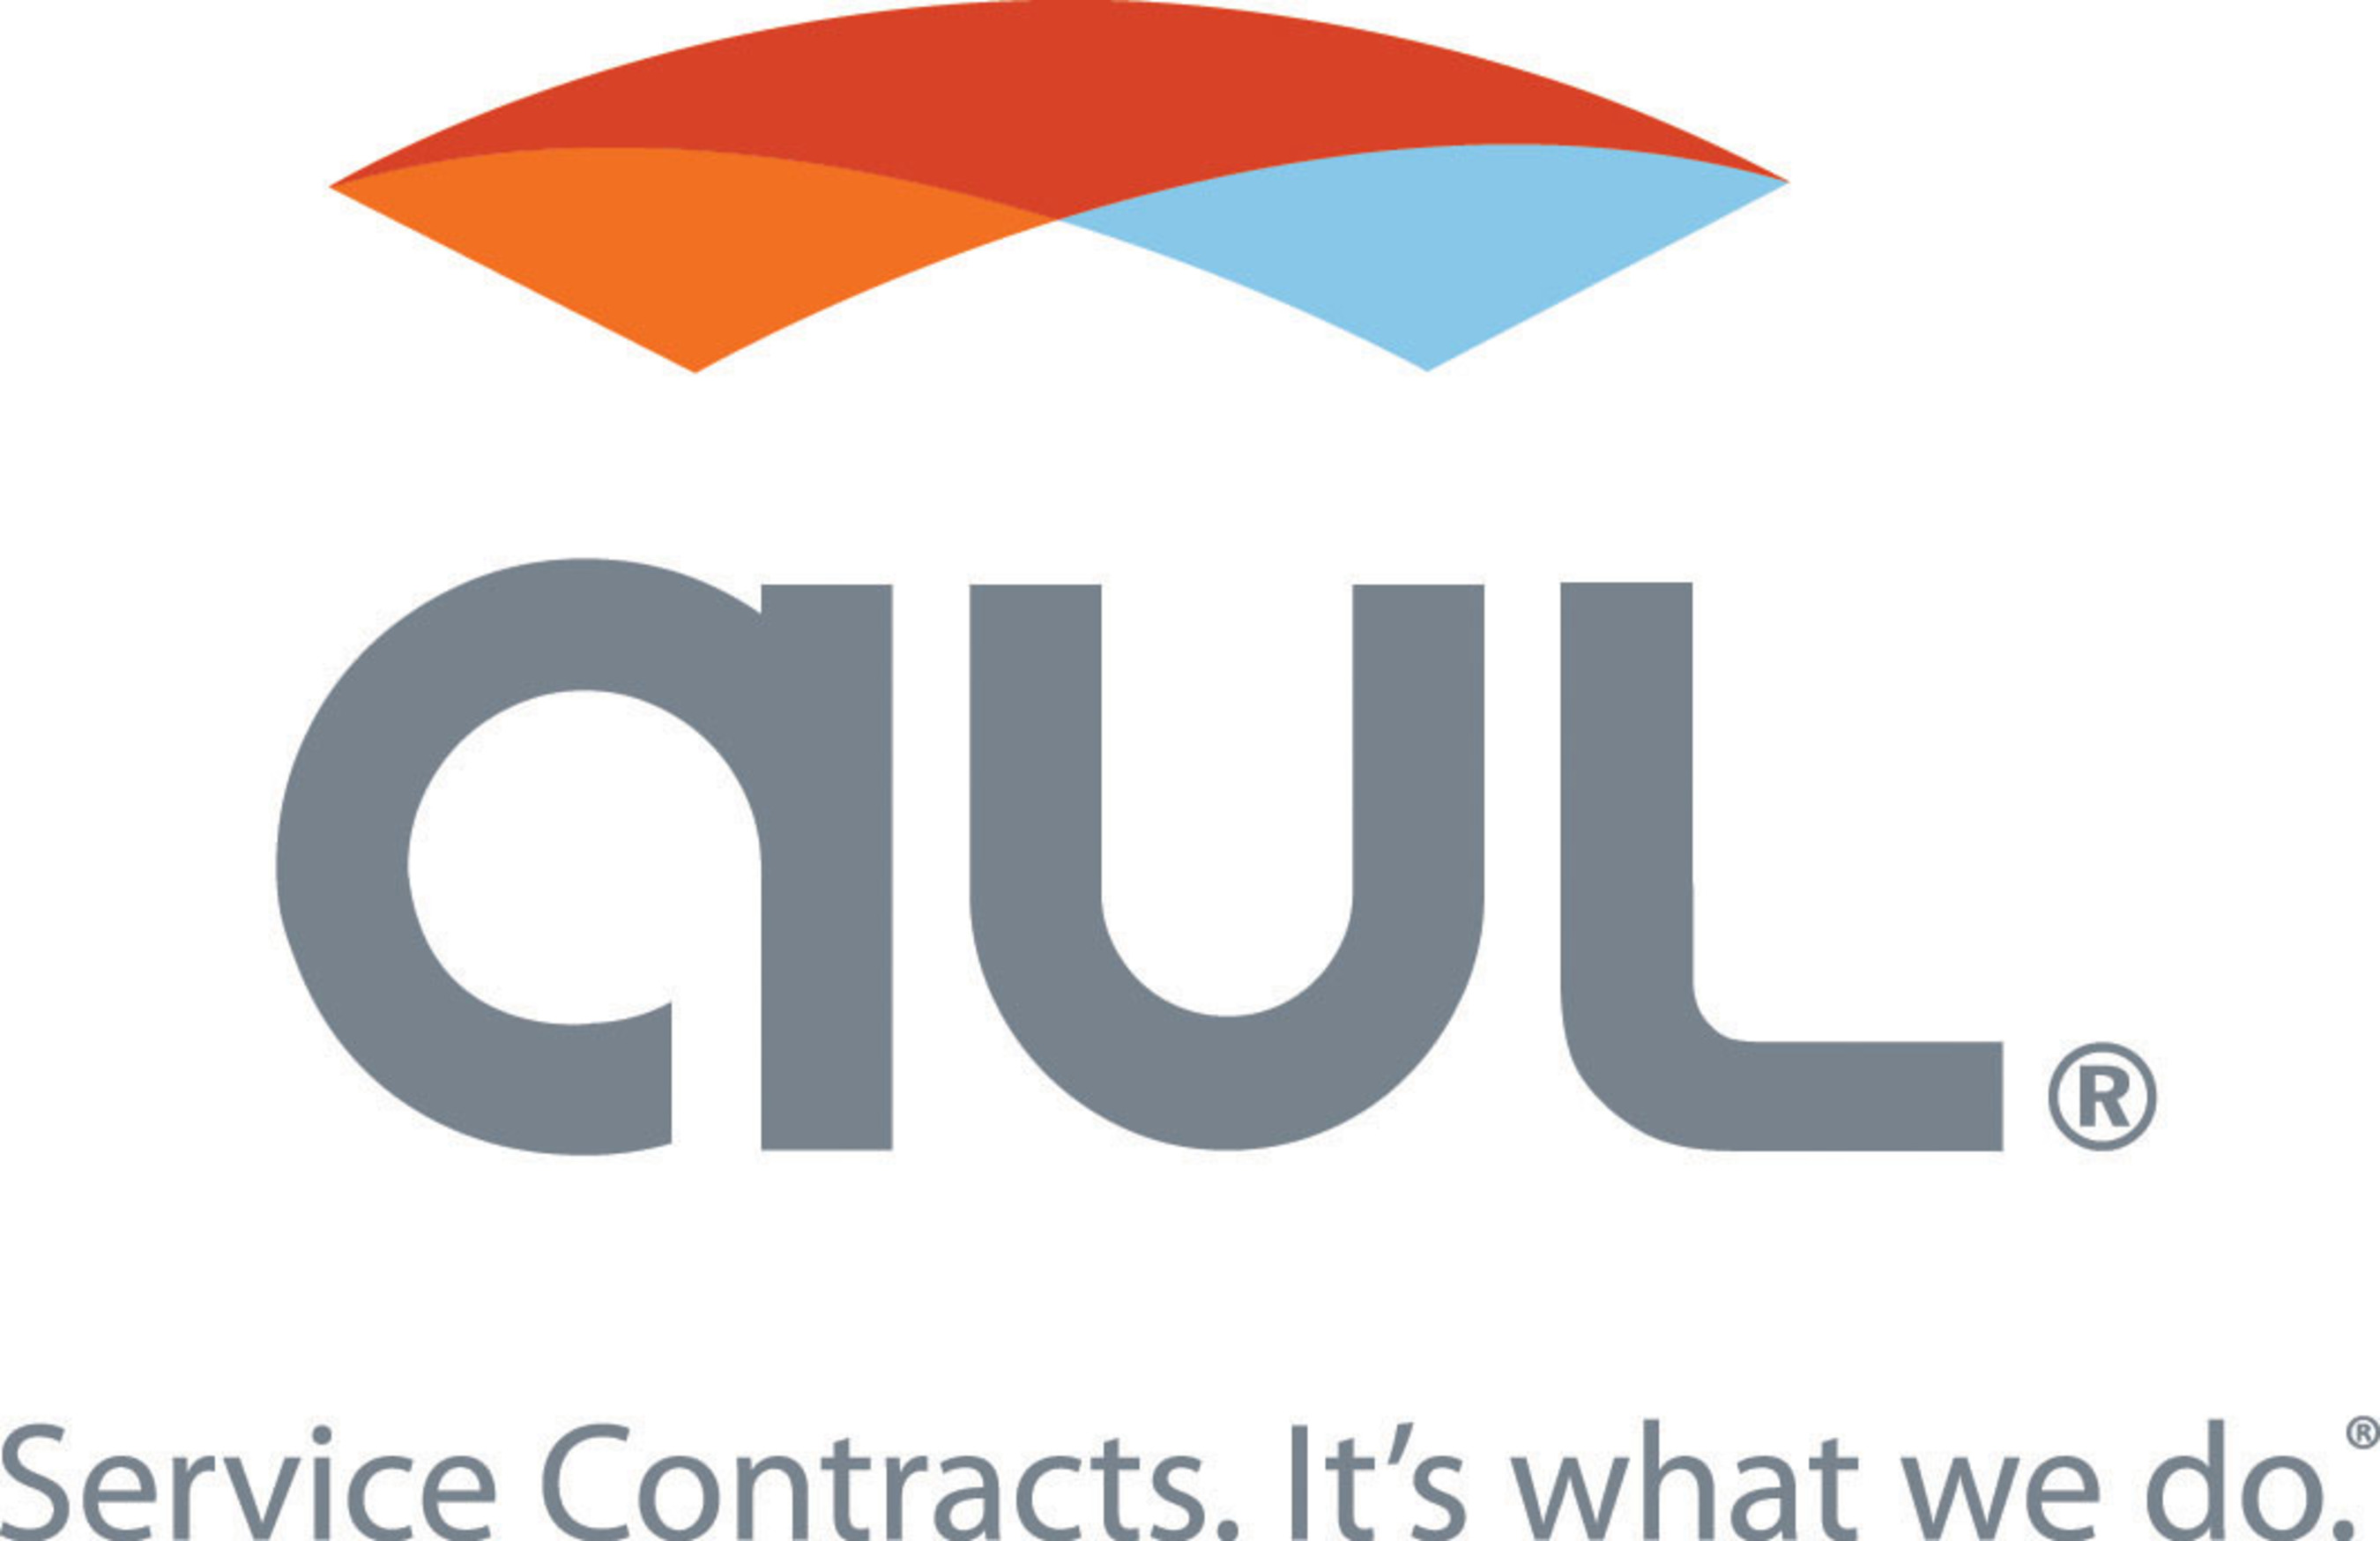 AUL Corp - Service Contracts. It's what we do. (PRNewsFoto/AUL Corp.) (PRNewsFoto/) (PRNewsFoto/)